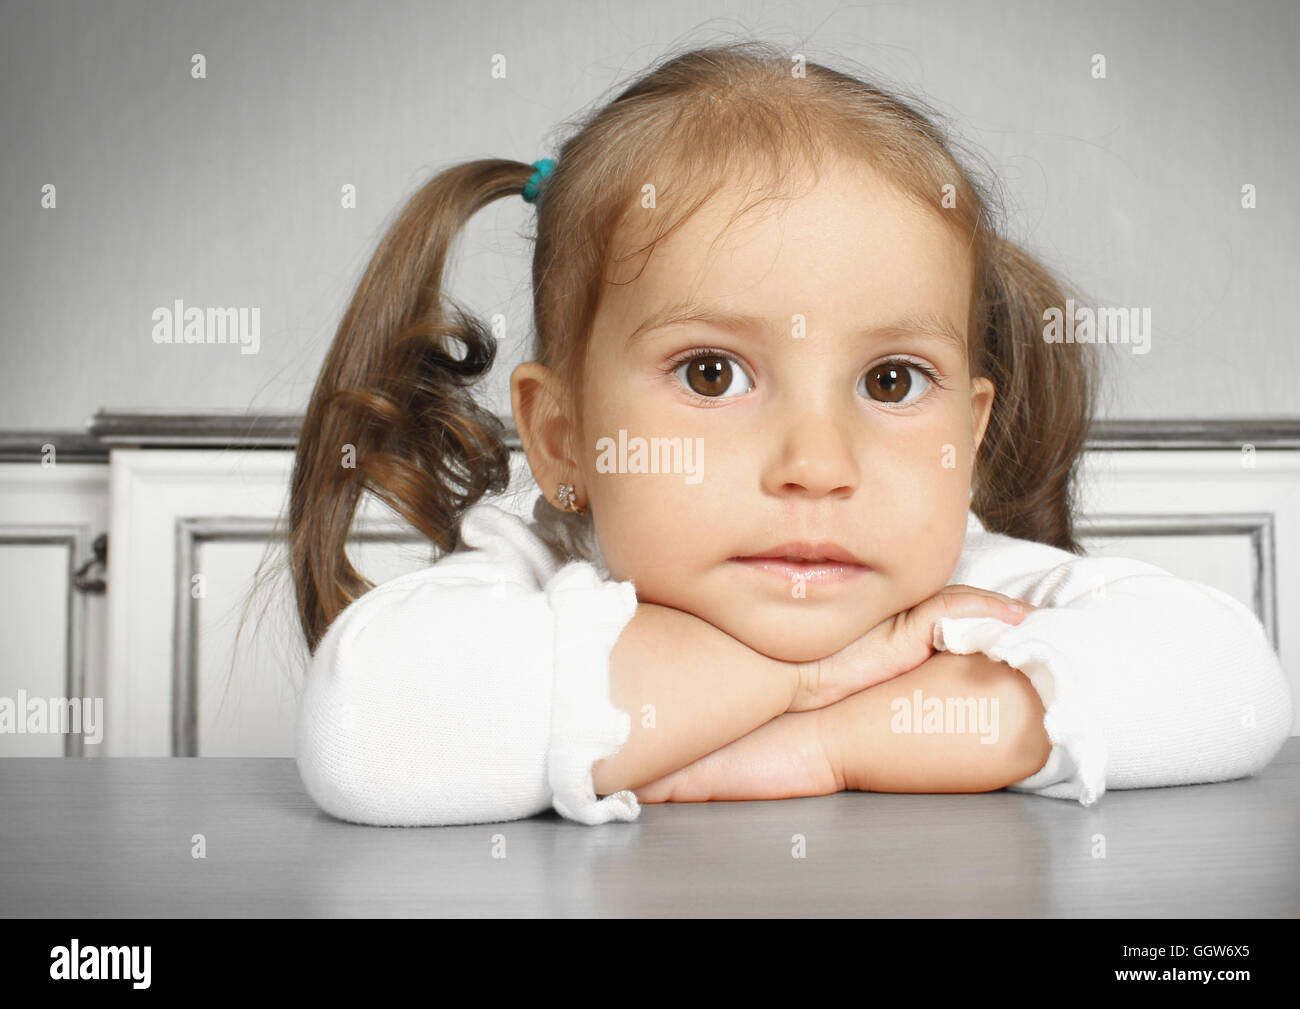 Porteait of serious dreaming child girl, in room Stock Photo